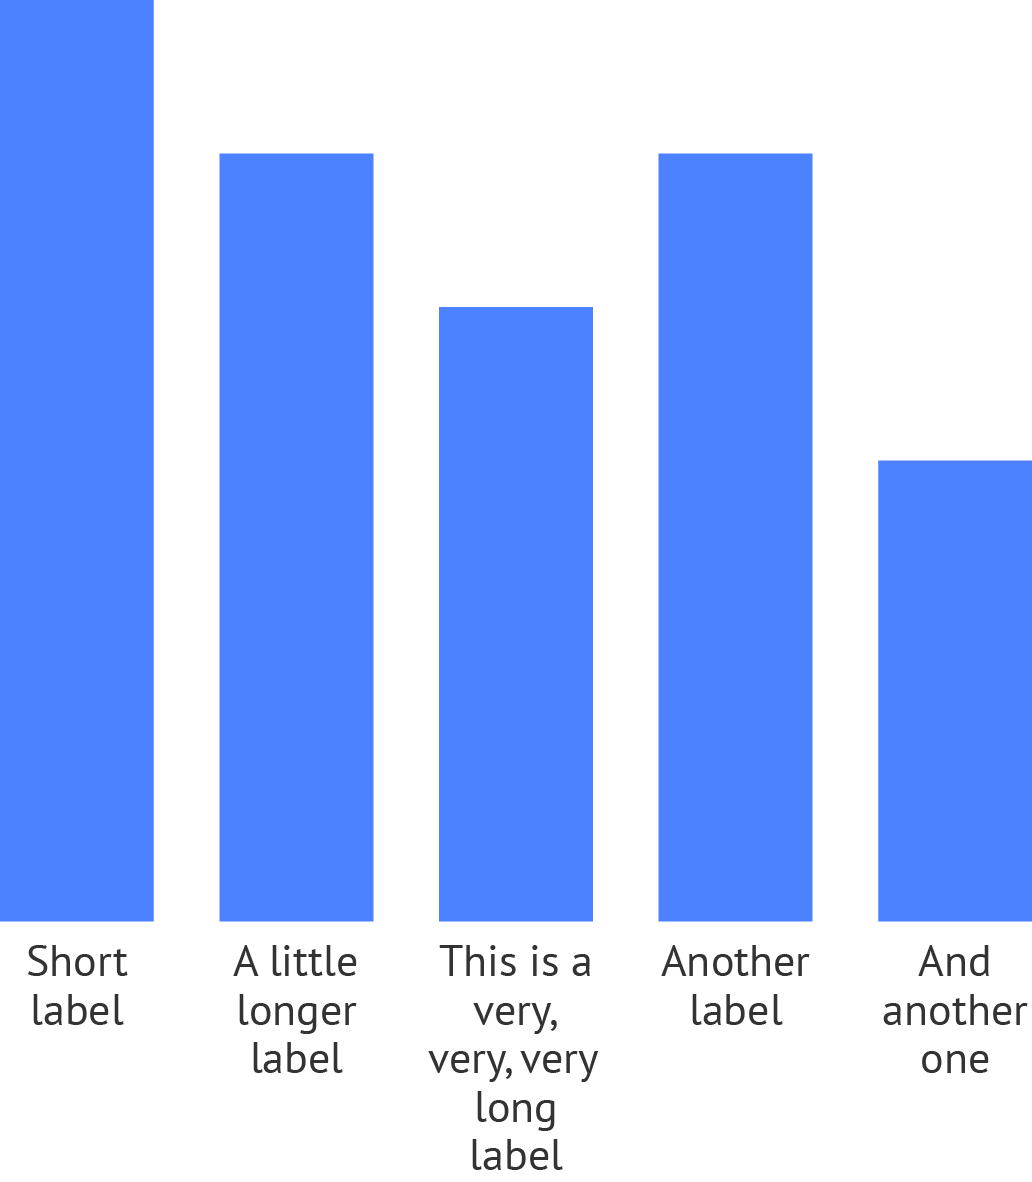 A vertical bar chart with labels wrapped over multiple lines